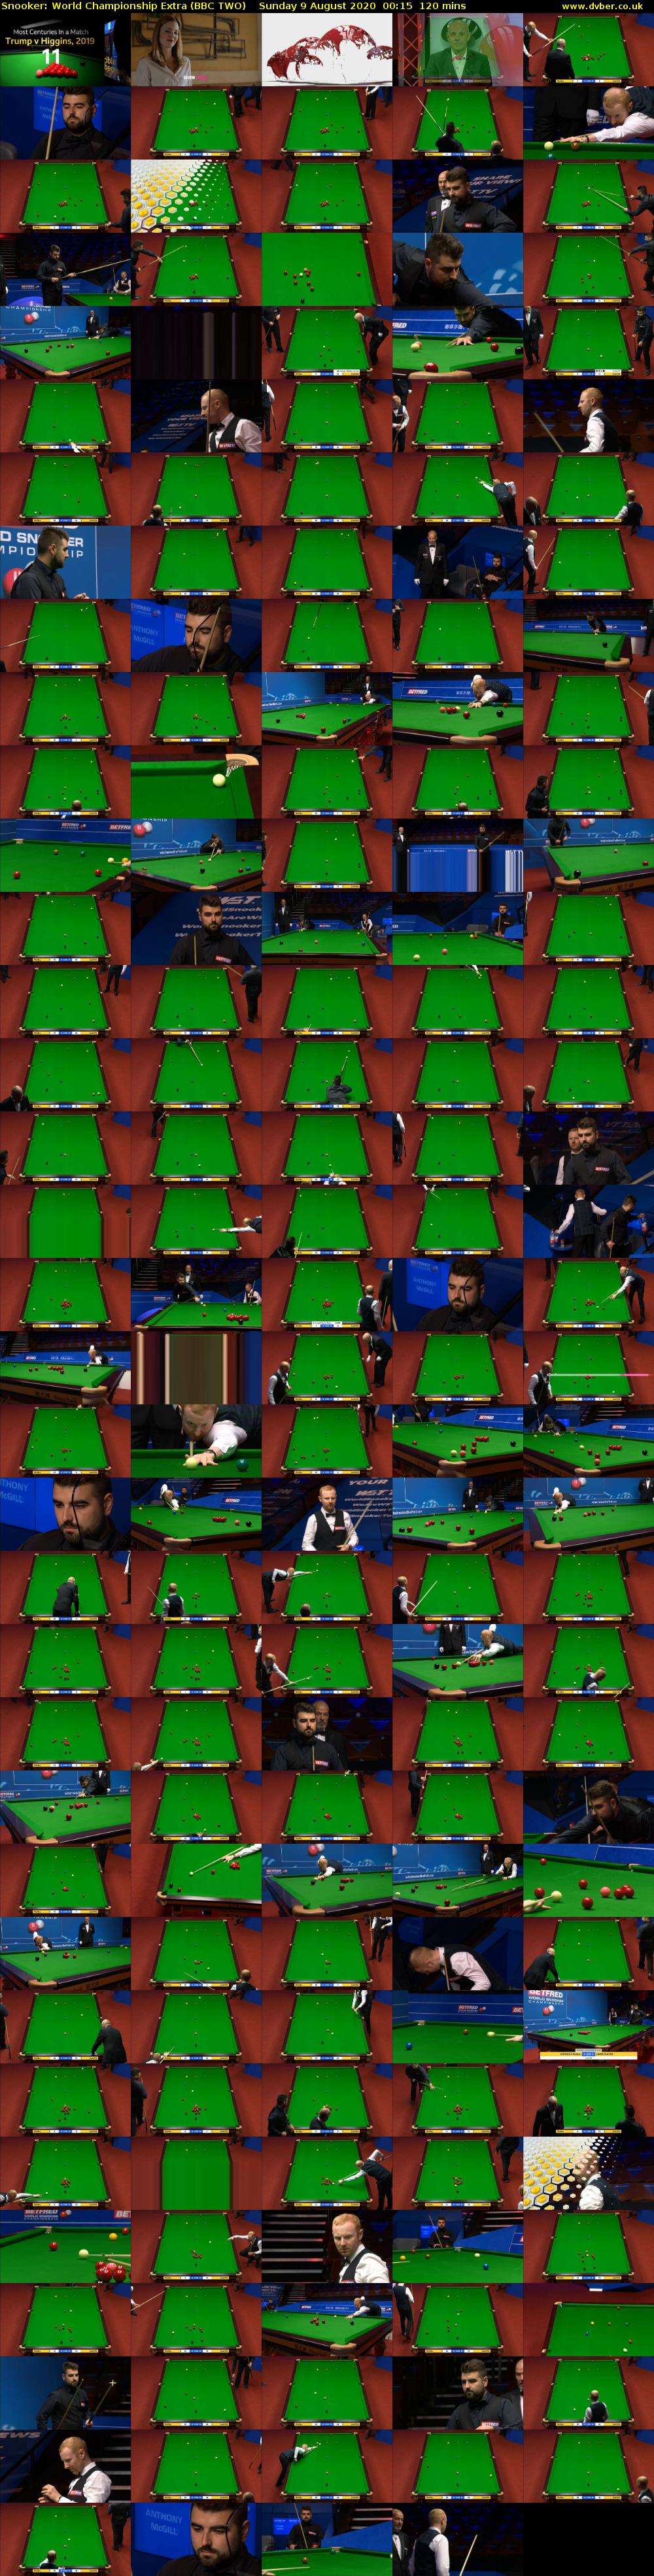 Snooker: World Championship Extra (BBC TWO) Sunday 9 August 2020 00:15 - 02:15